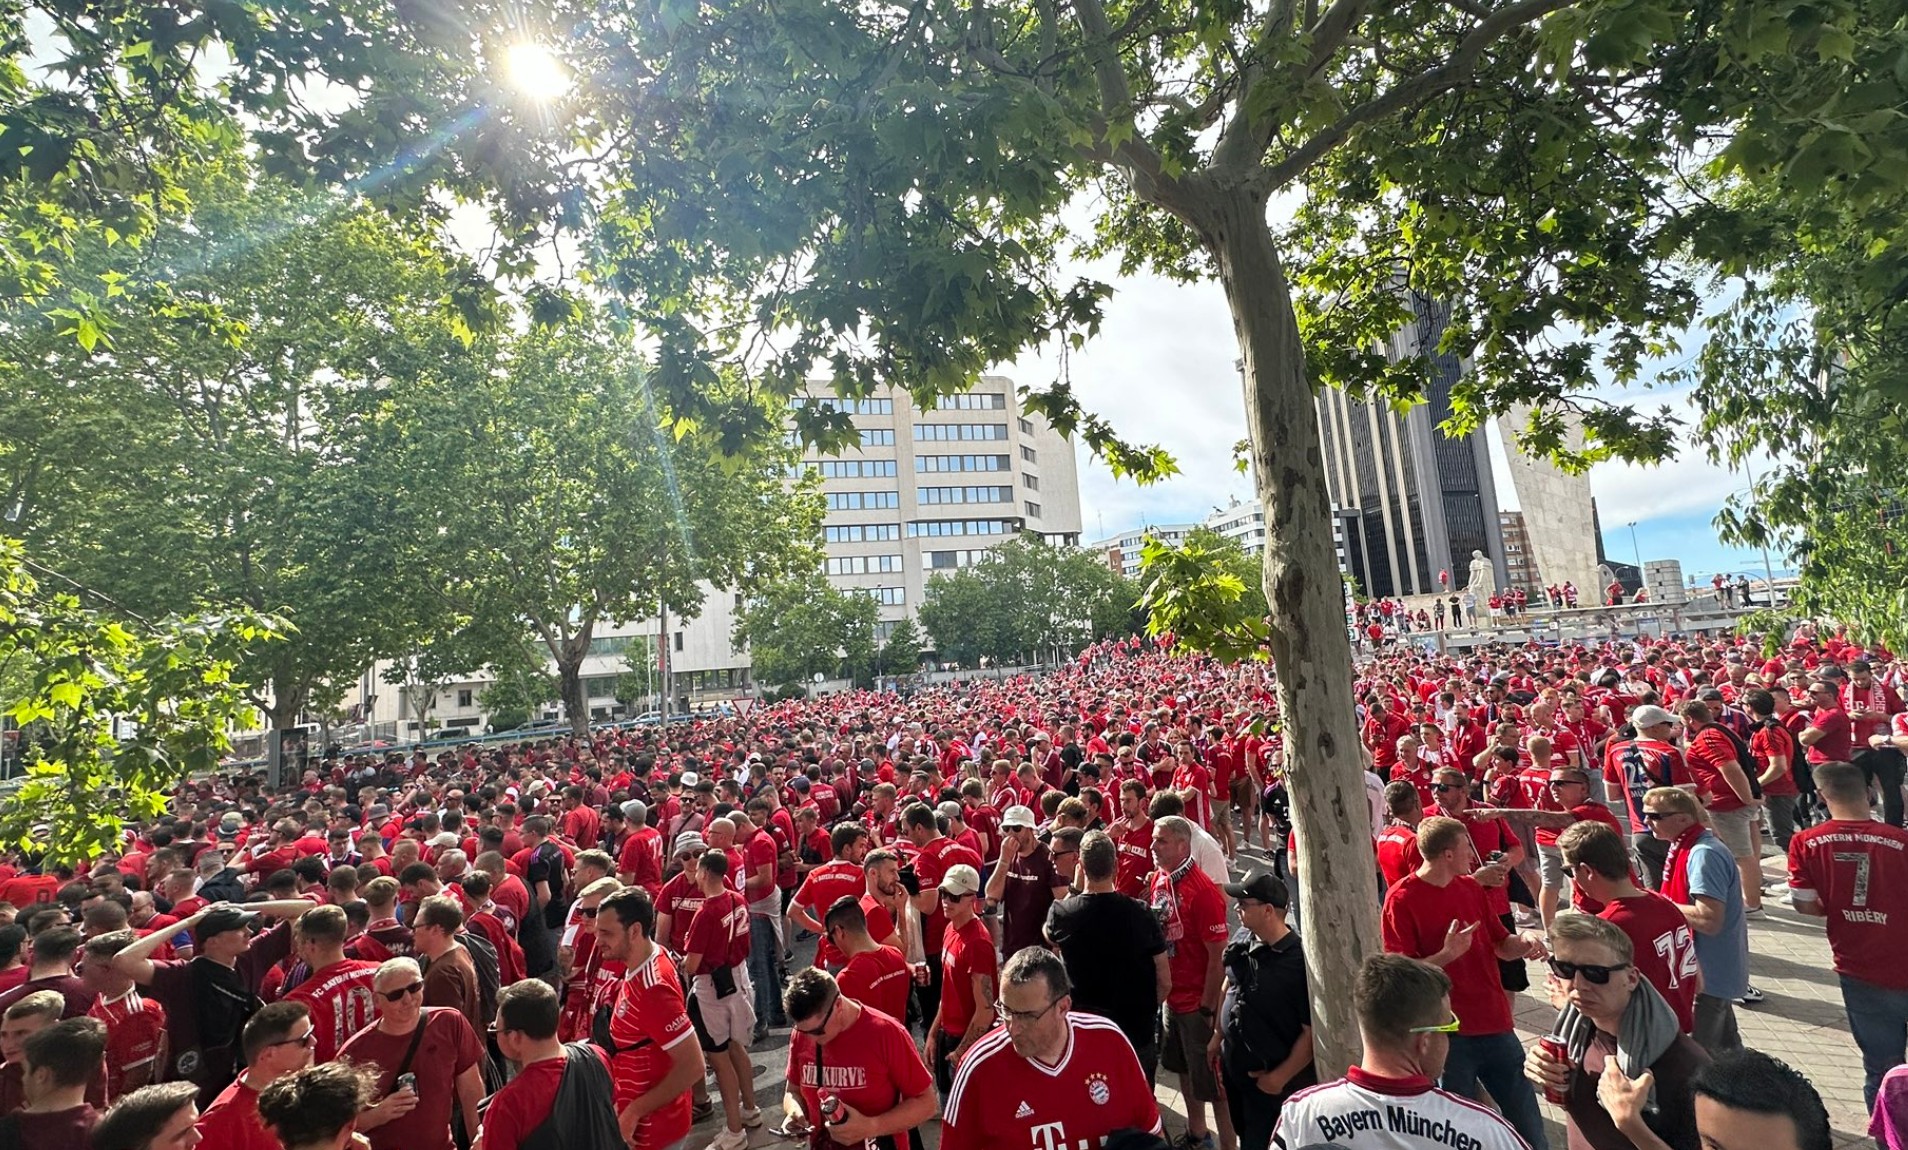 Video: Madrid is a sea of red as Bayern supporters head to the Bernabeu